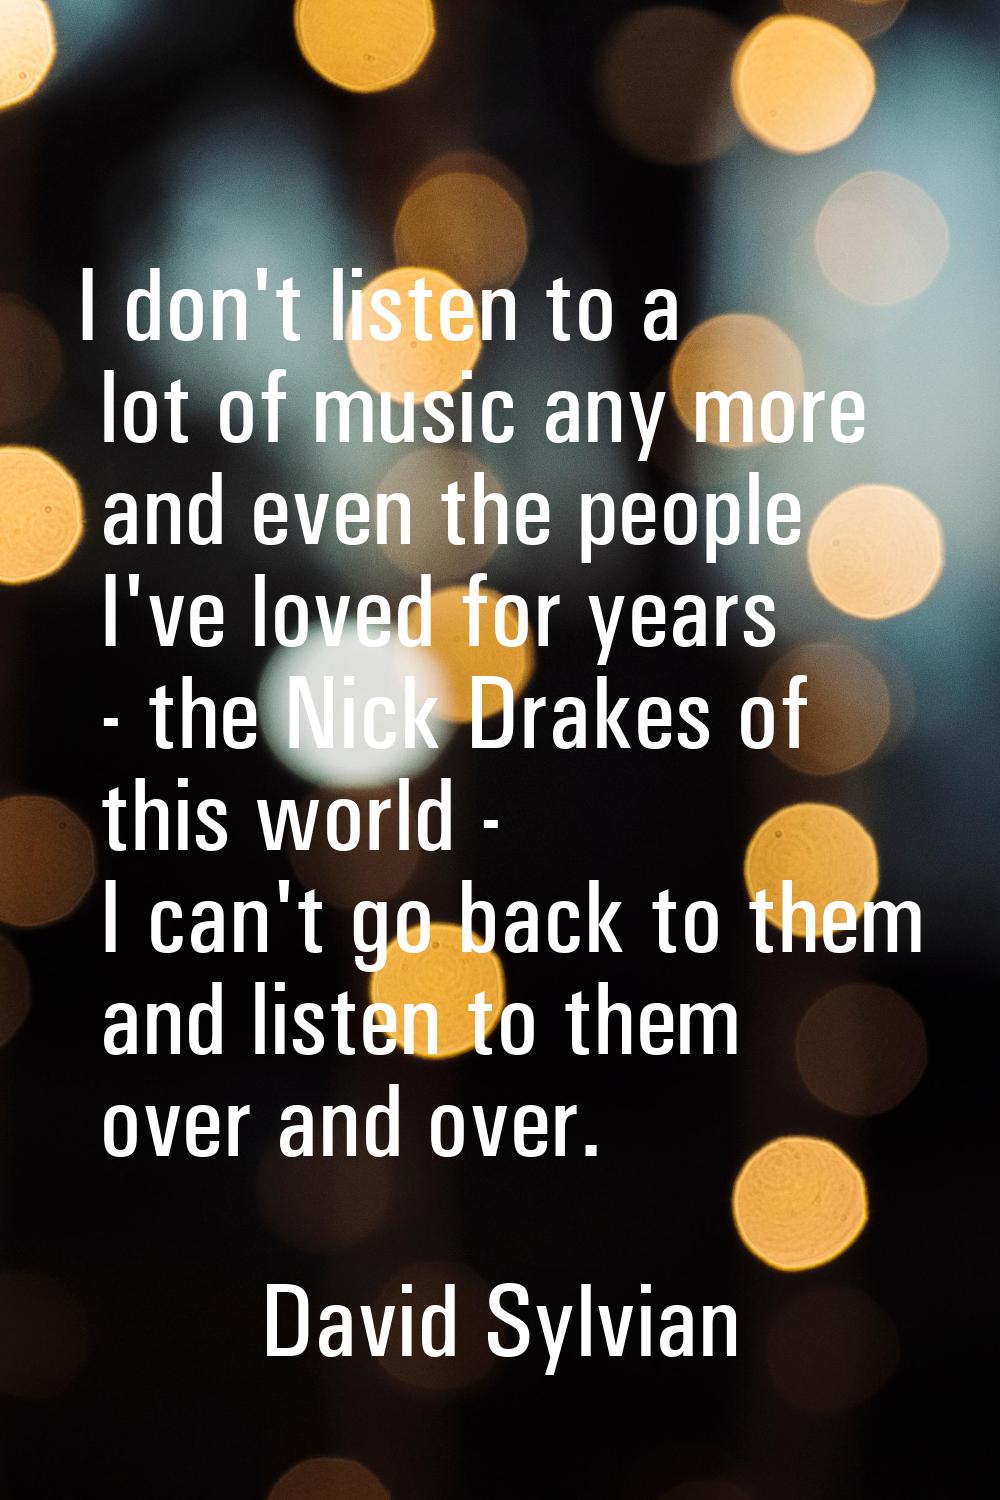 I don't listen to a lot of music any more and even the people I've loved for years - the Nick Drake